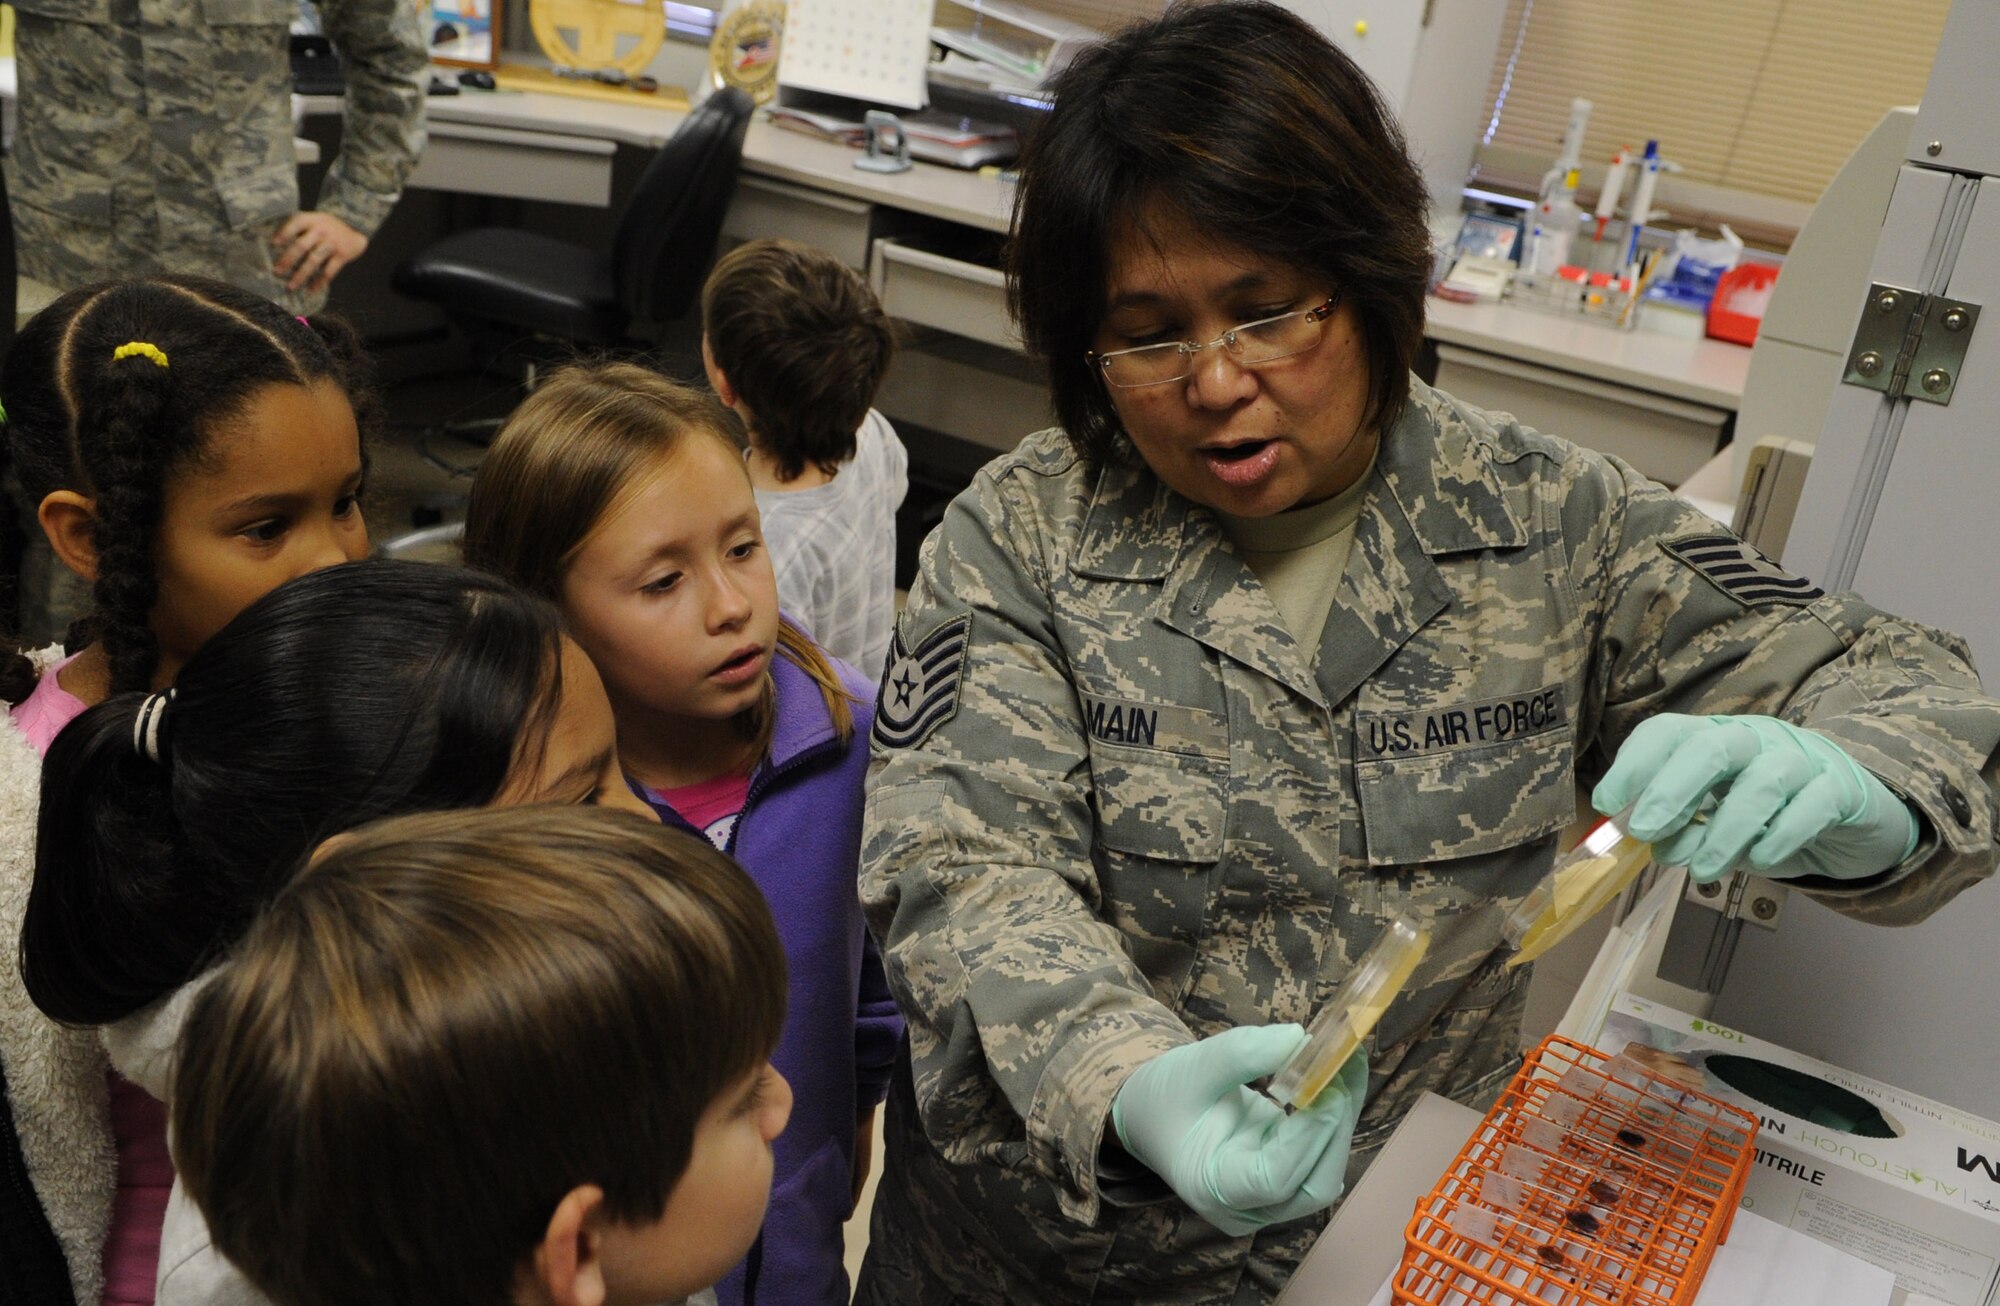 U.S. Air Force Tech. Sgt. Rowena Main, 18th Medical Support Squadron NCO in charge of microbiology, shows elementary students bacteria samples on Kadena Air Base, Japan, March 14, 2013. The students conducted a science project where they grew bacteria cultures in their classroom, with the assistance of the medical laboratory. (U.S. Air Force photo/Airman 1st Class Keith A. James)